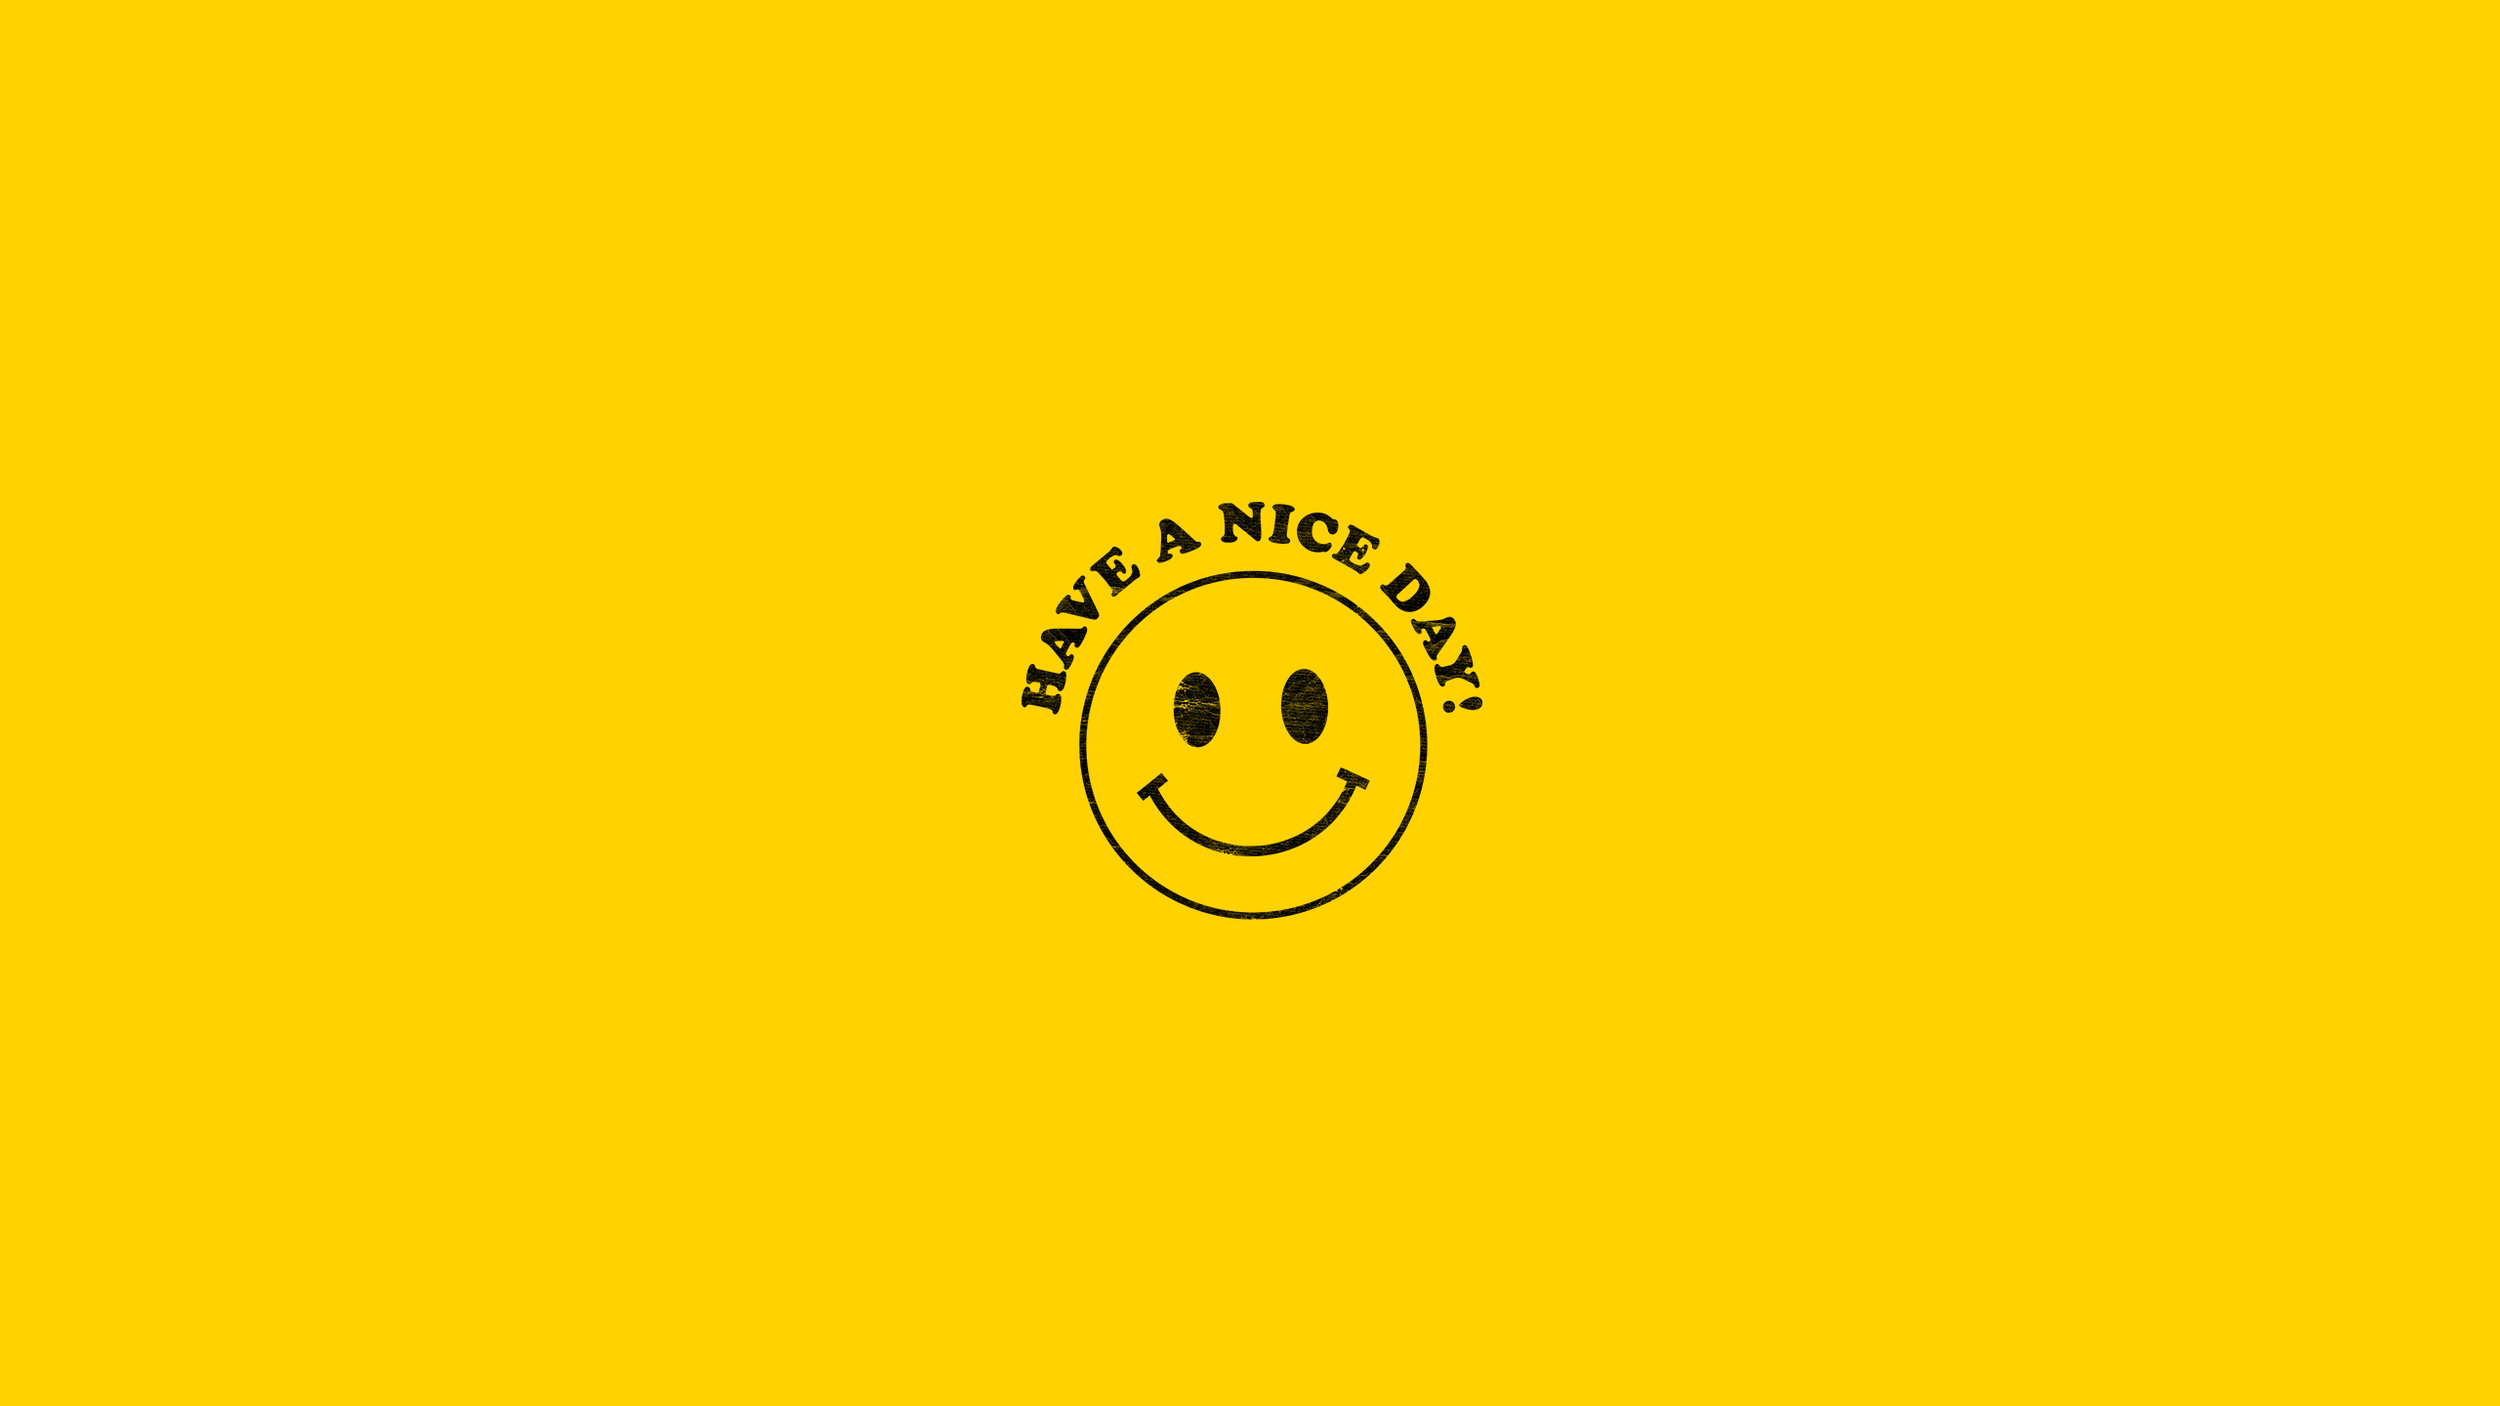 Have a Nice Day Wallpaper